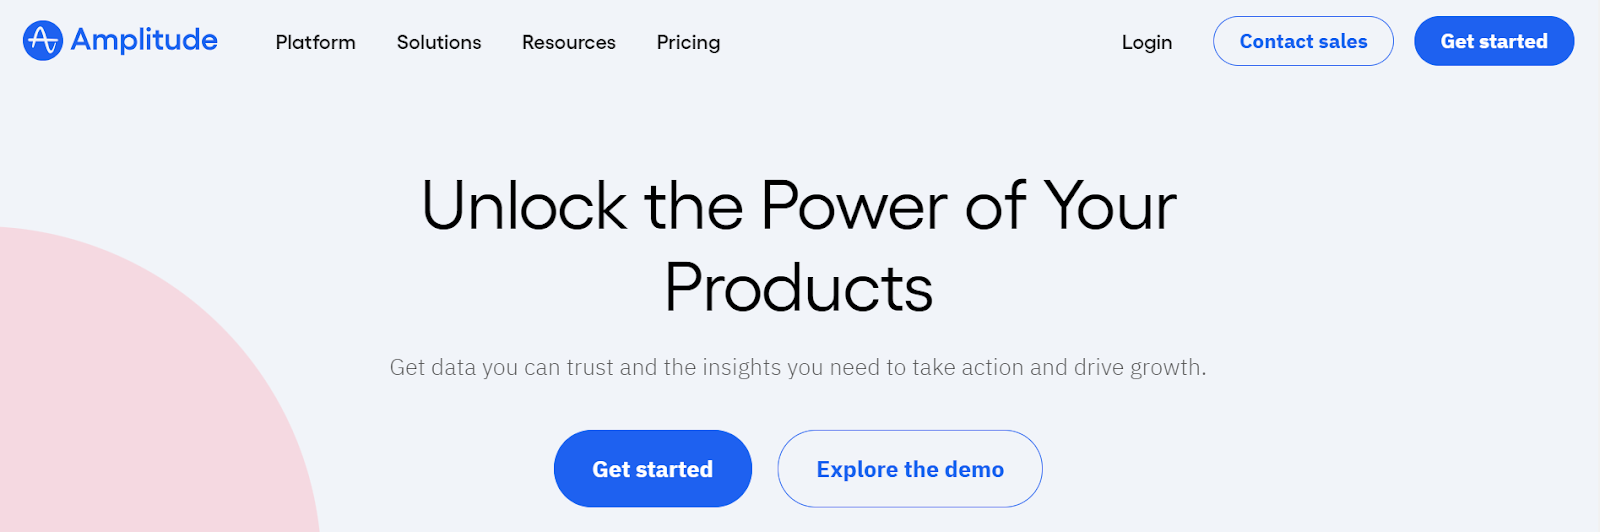 Amplitude - unlocking the power of your products and gaining valuable insights.